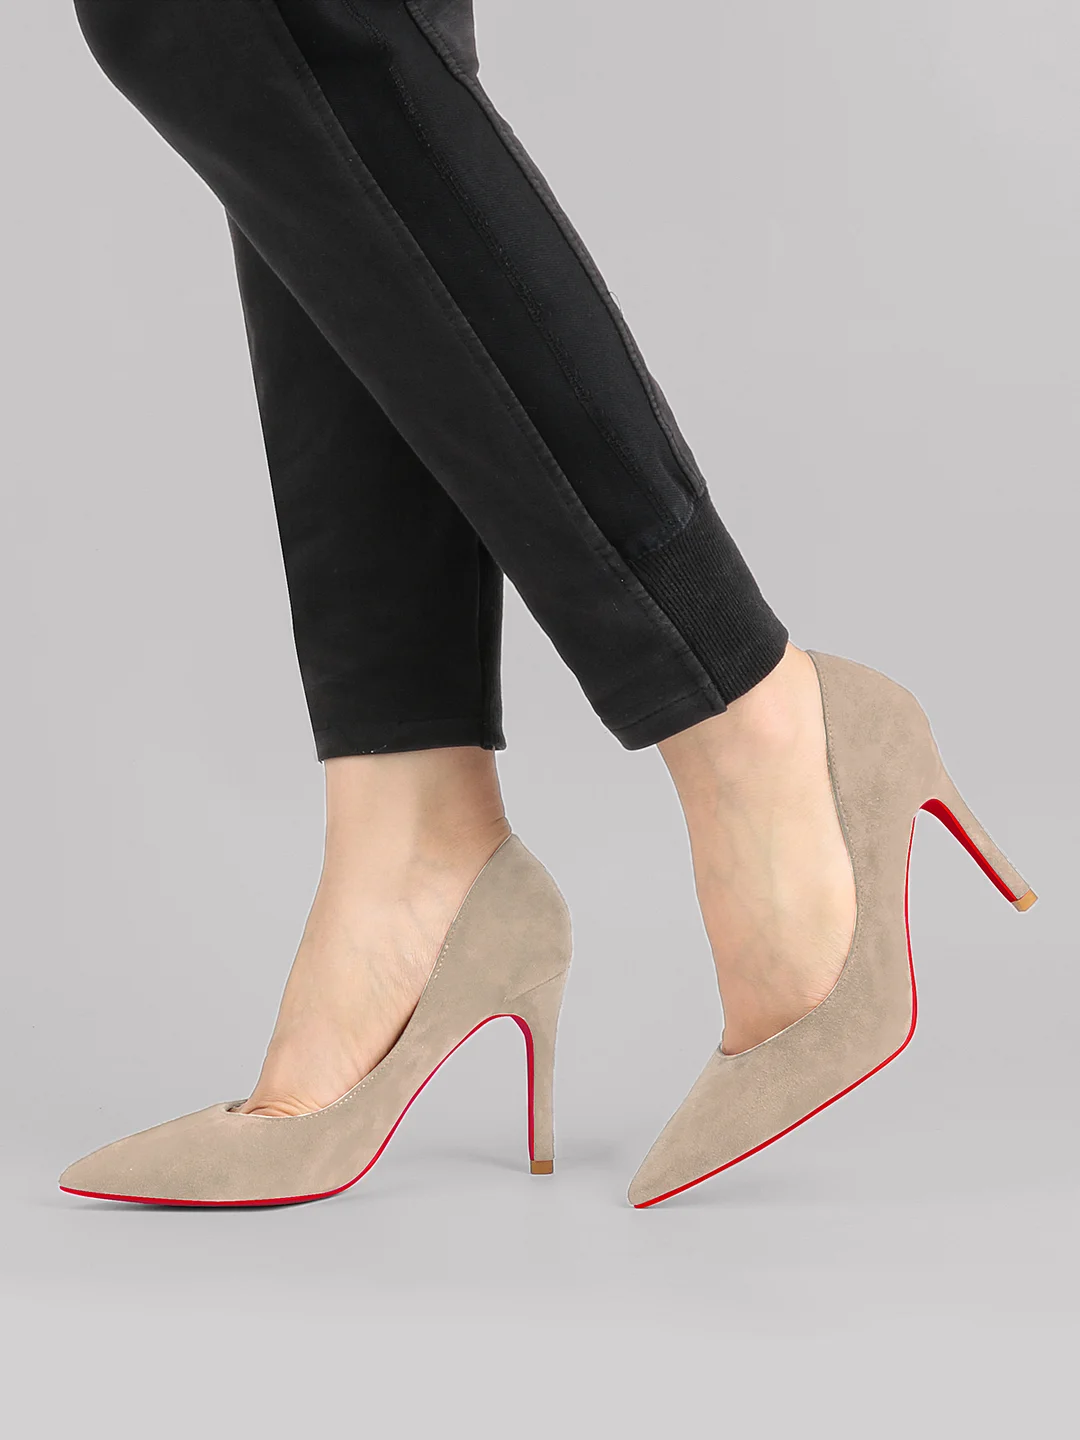 3.5" Women's Middle Heels Pointed Toe Red Bottom Suede Pumps